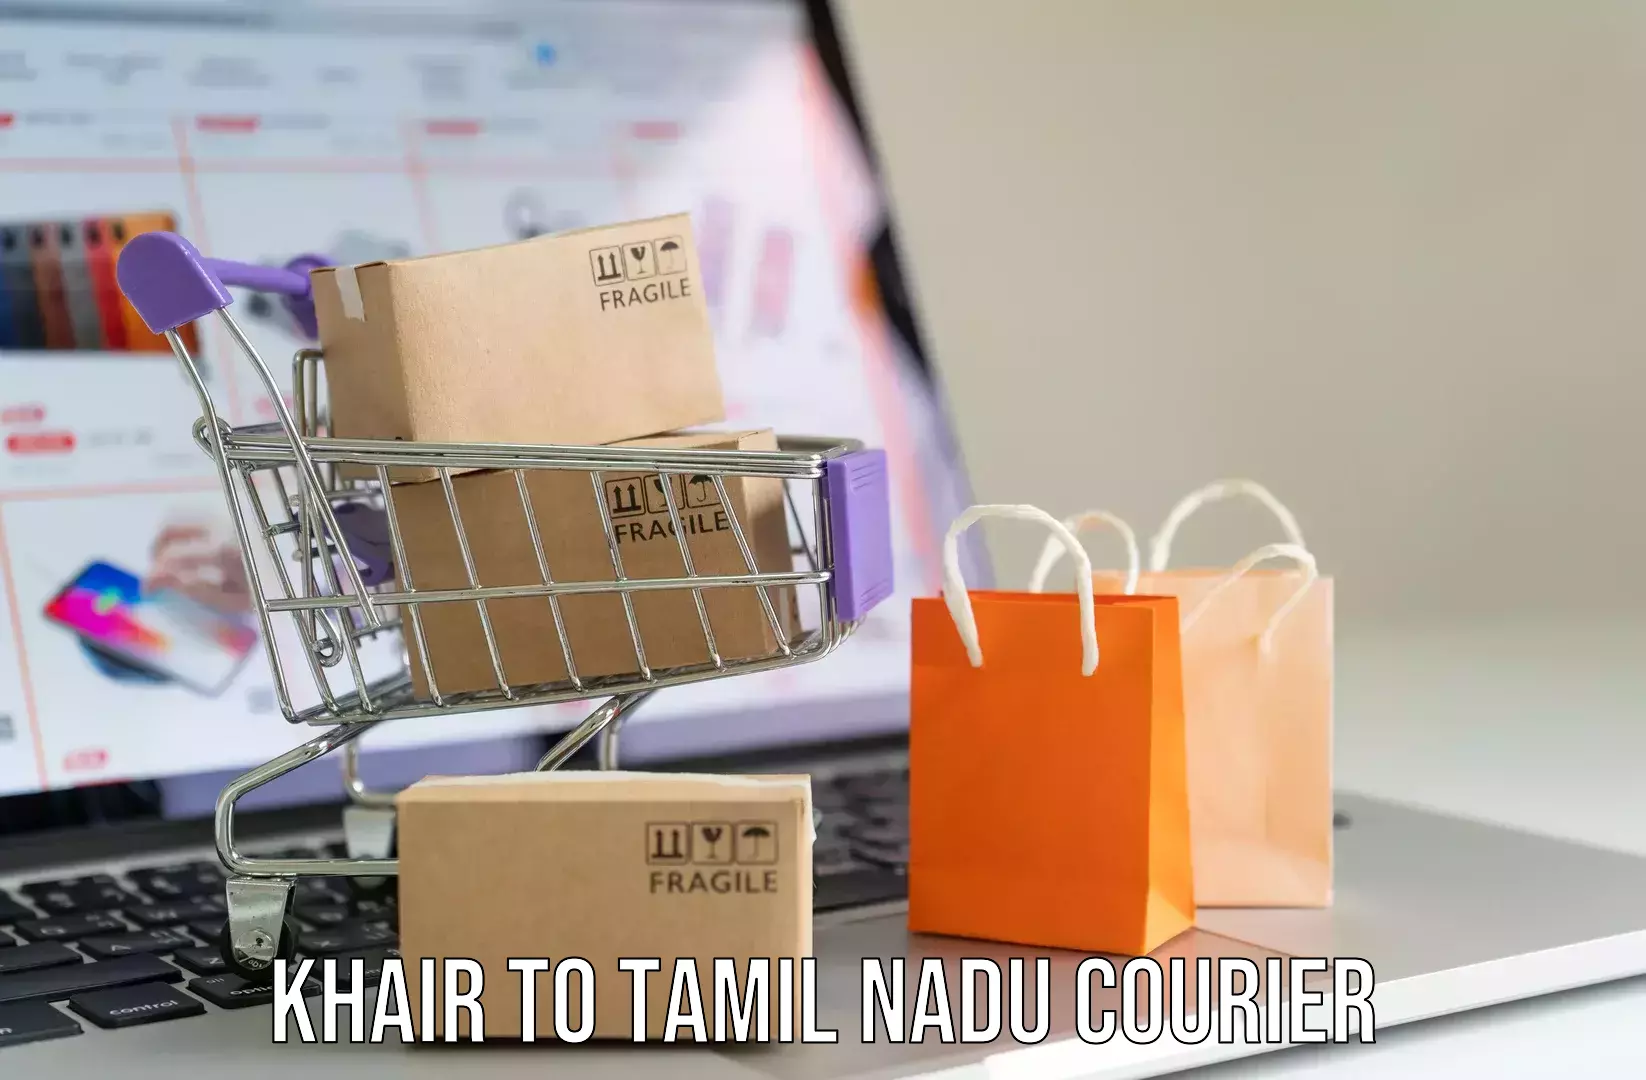 Luggage shipment tracking Khair to Vellore Institute of Technology